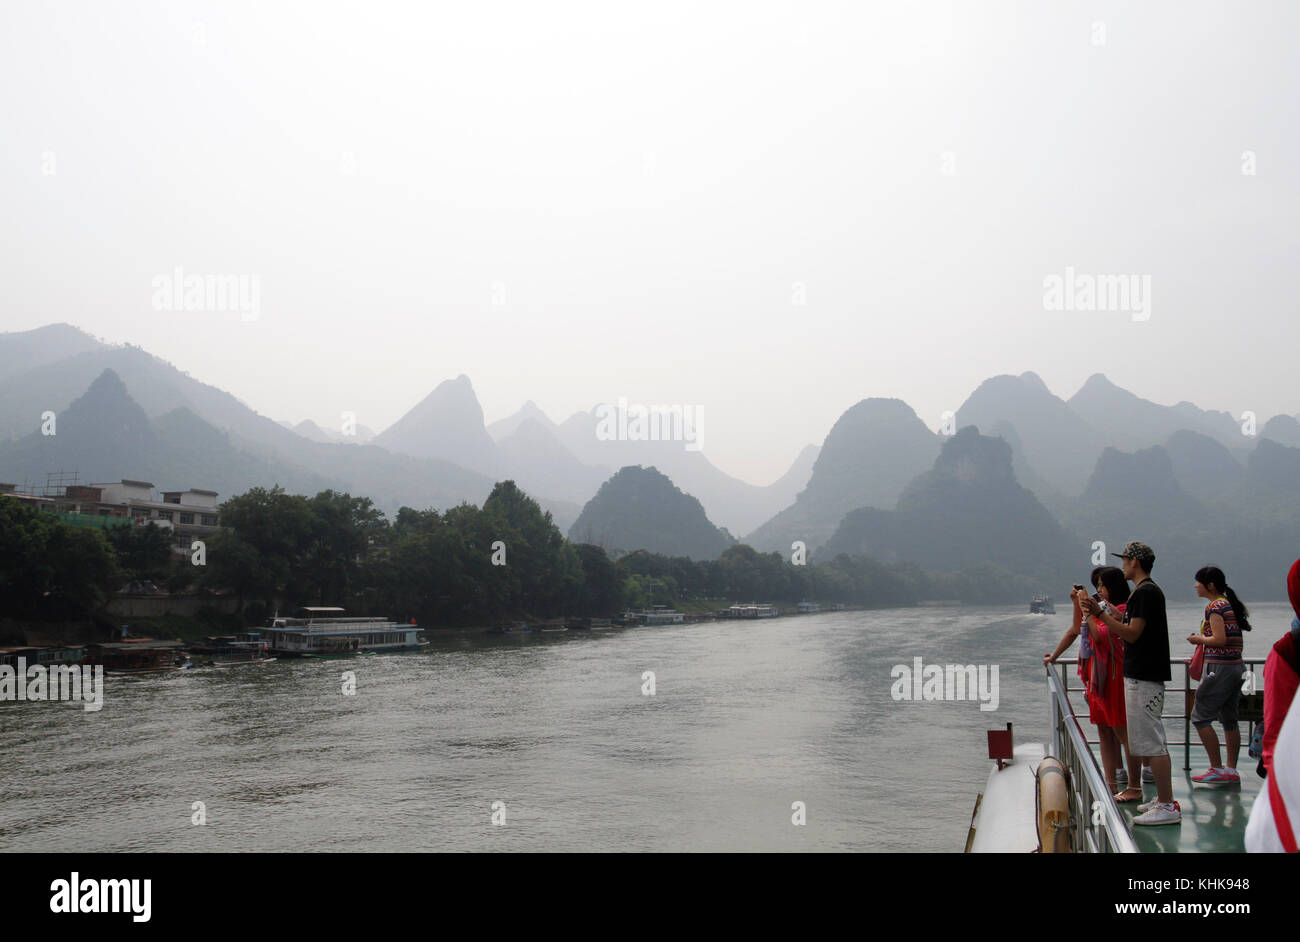 Tourists on a boat taking photos in Guilin, China. Stock Photo